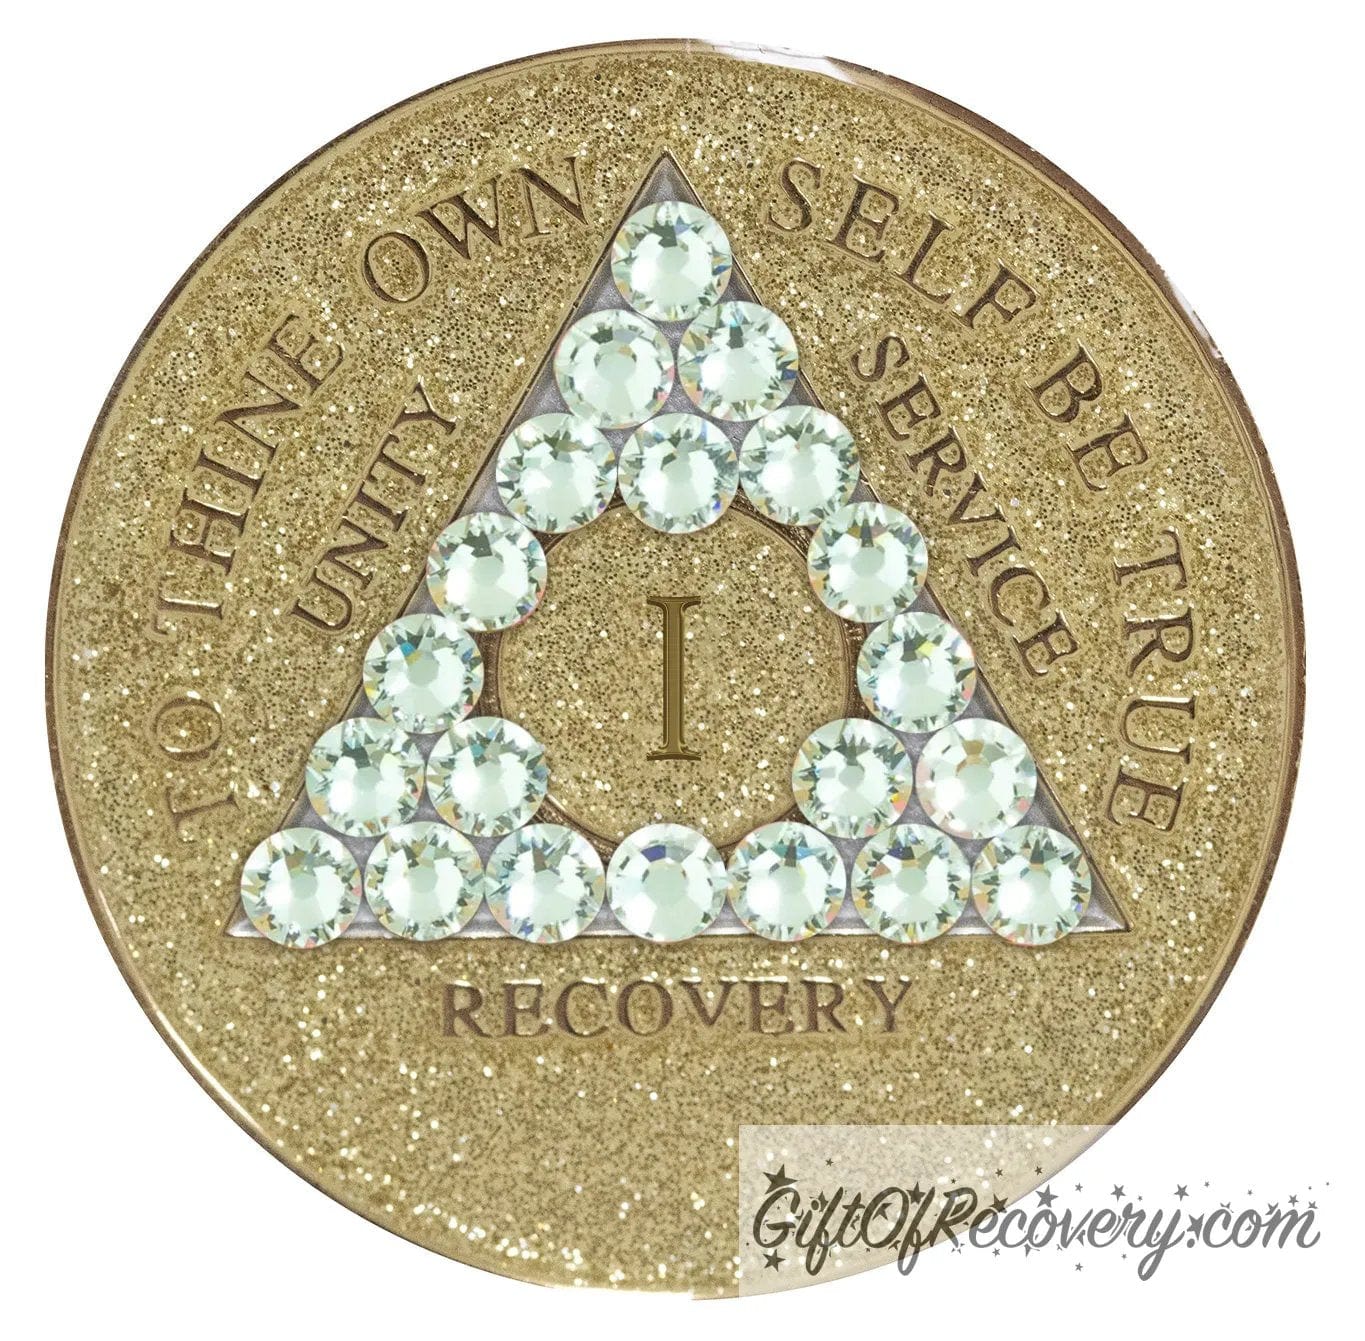 1 year AA medallion in gold glitter with twenty-one genuine clear CZ crystals in the shape of a triangle, symbolizing transformation under pressure, to thine own self be true, unity, service, recovery and roman numeral are embossed with 14k gold-plated brass along with outer rim, sealed in a chip and scratch-resistant resin giving it a beautiful glossy look.